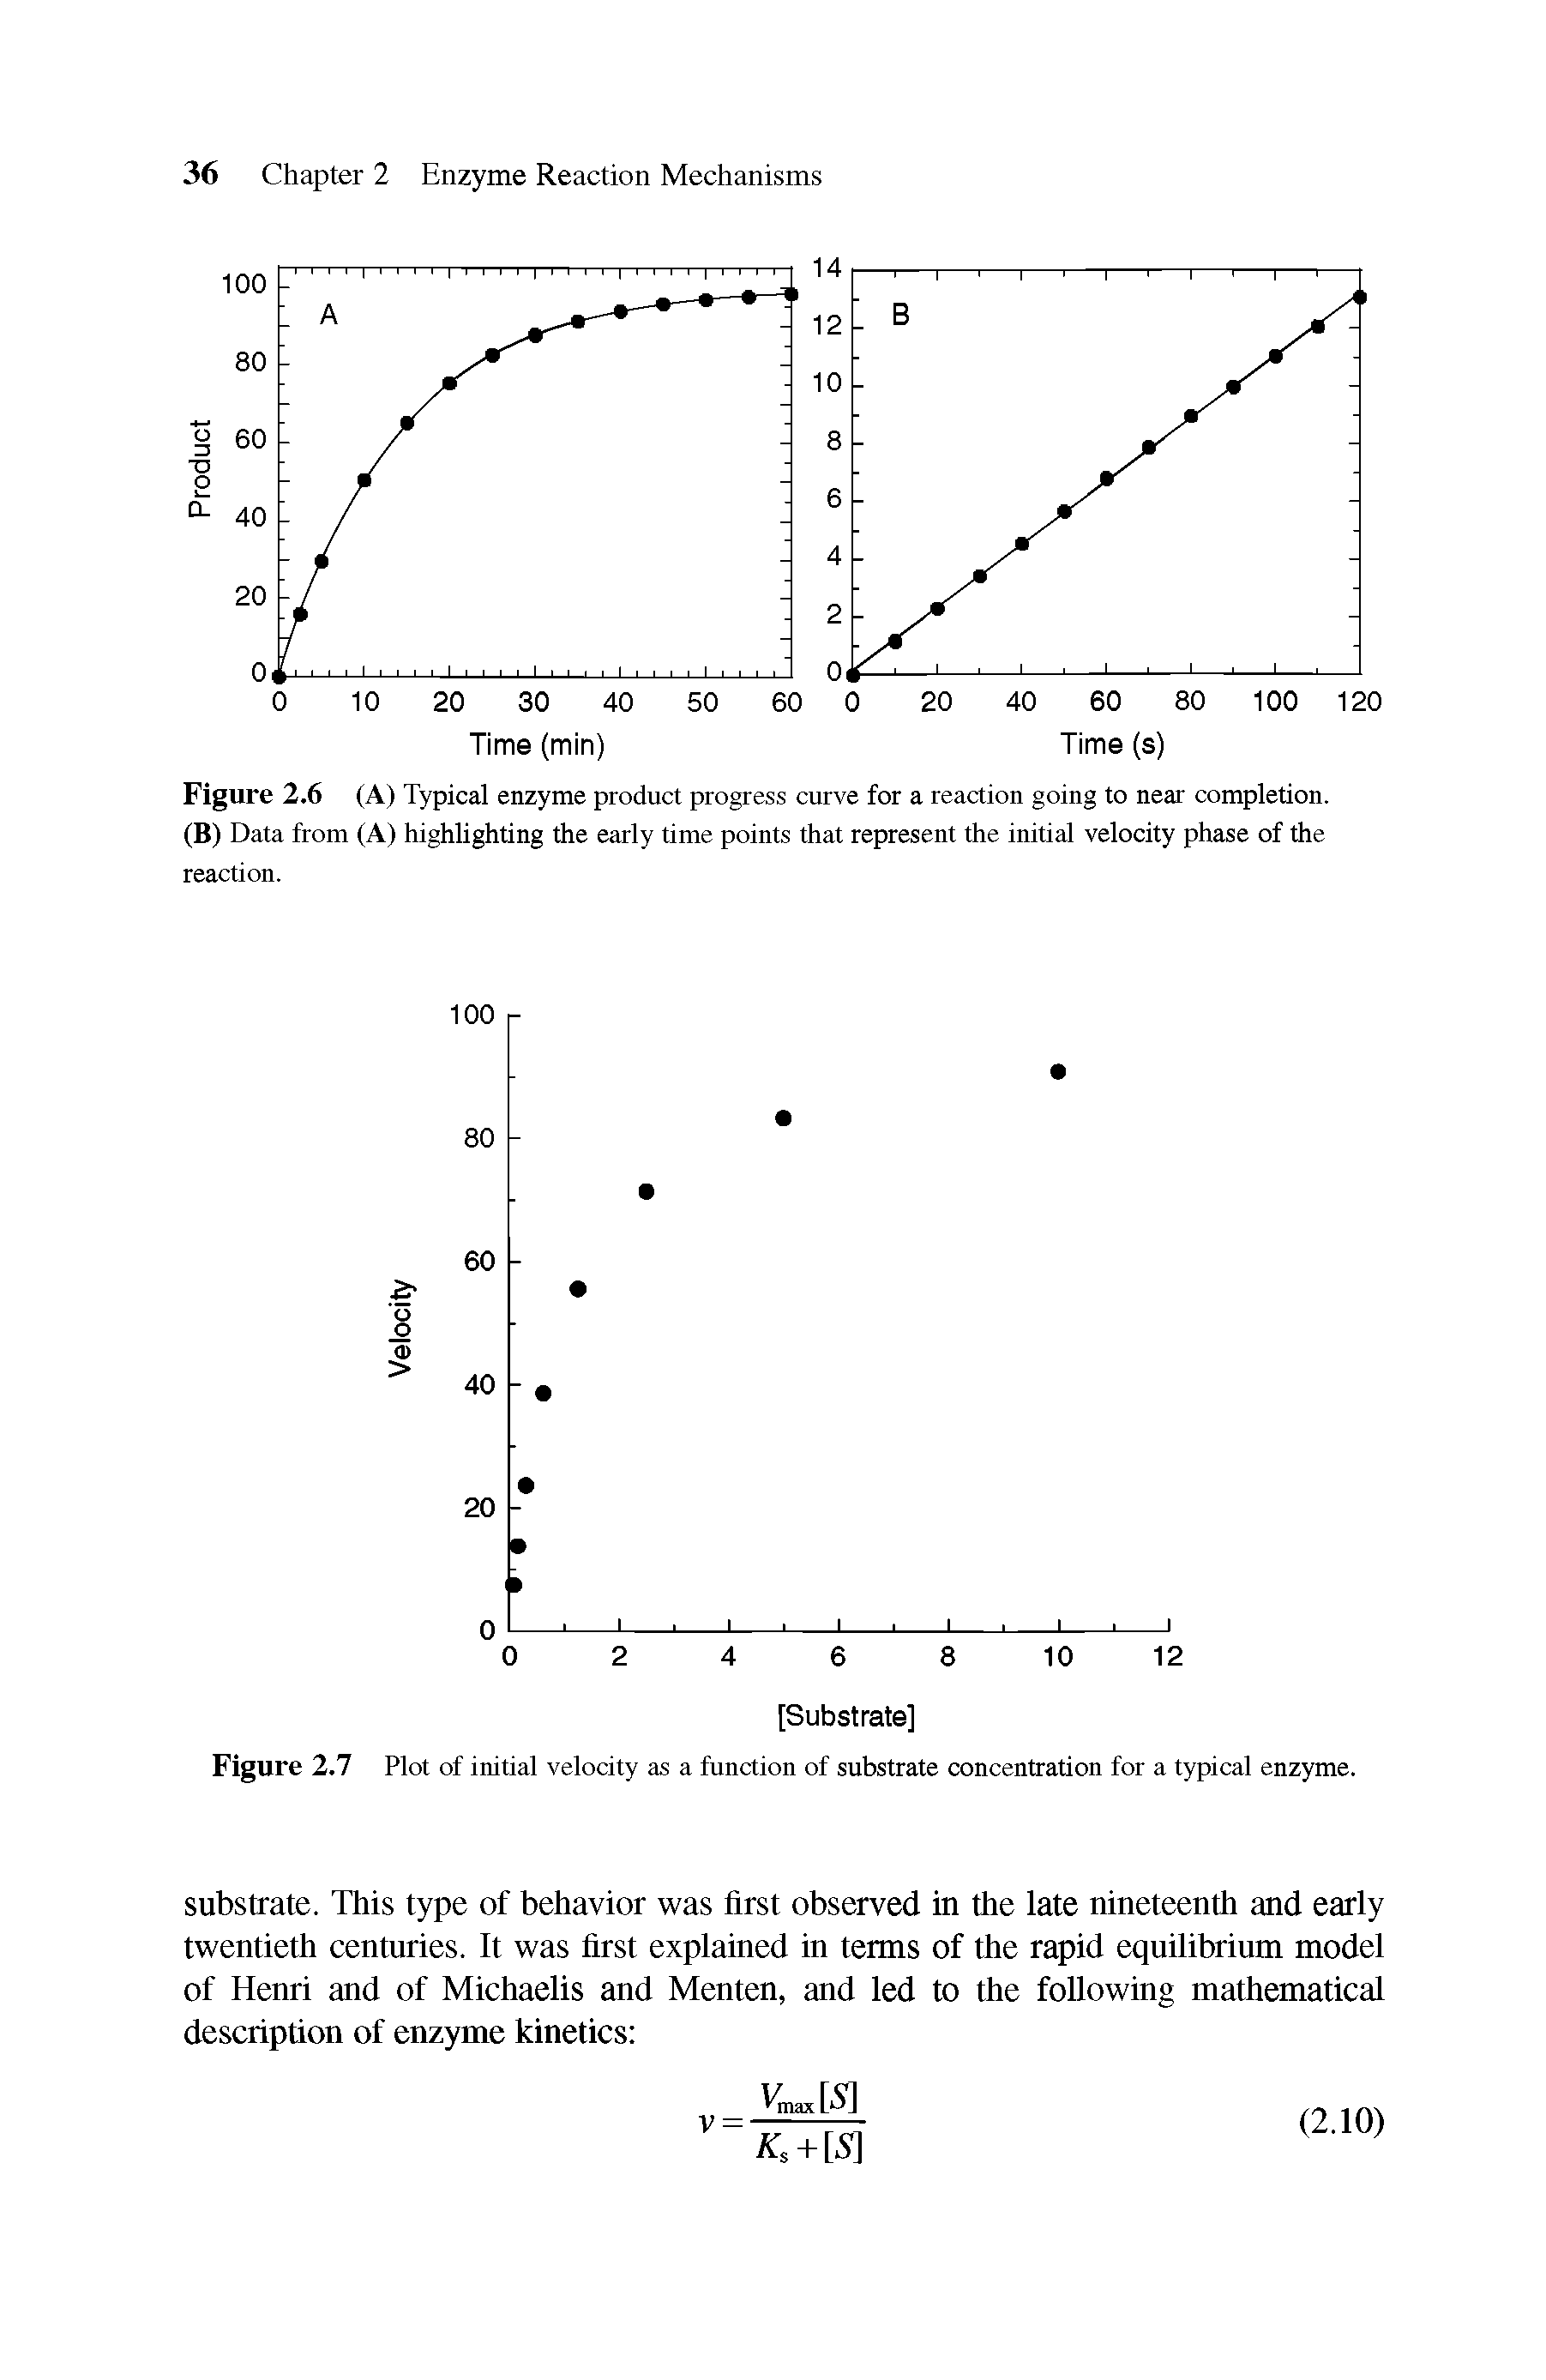 Figure 2.6 (A) Typical enzyme product progress curve for a reaction going to near completion.